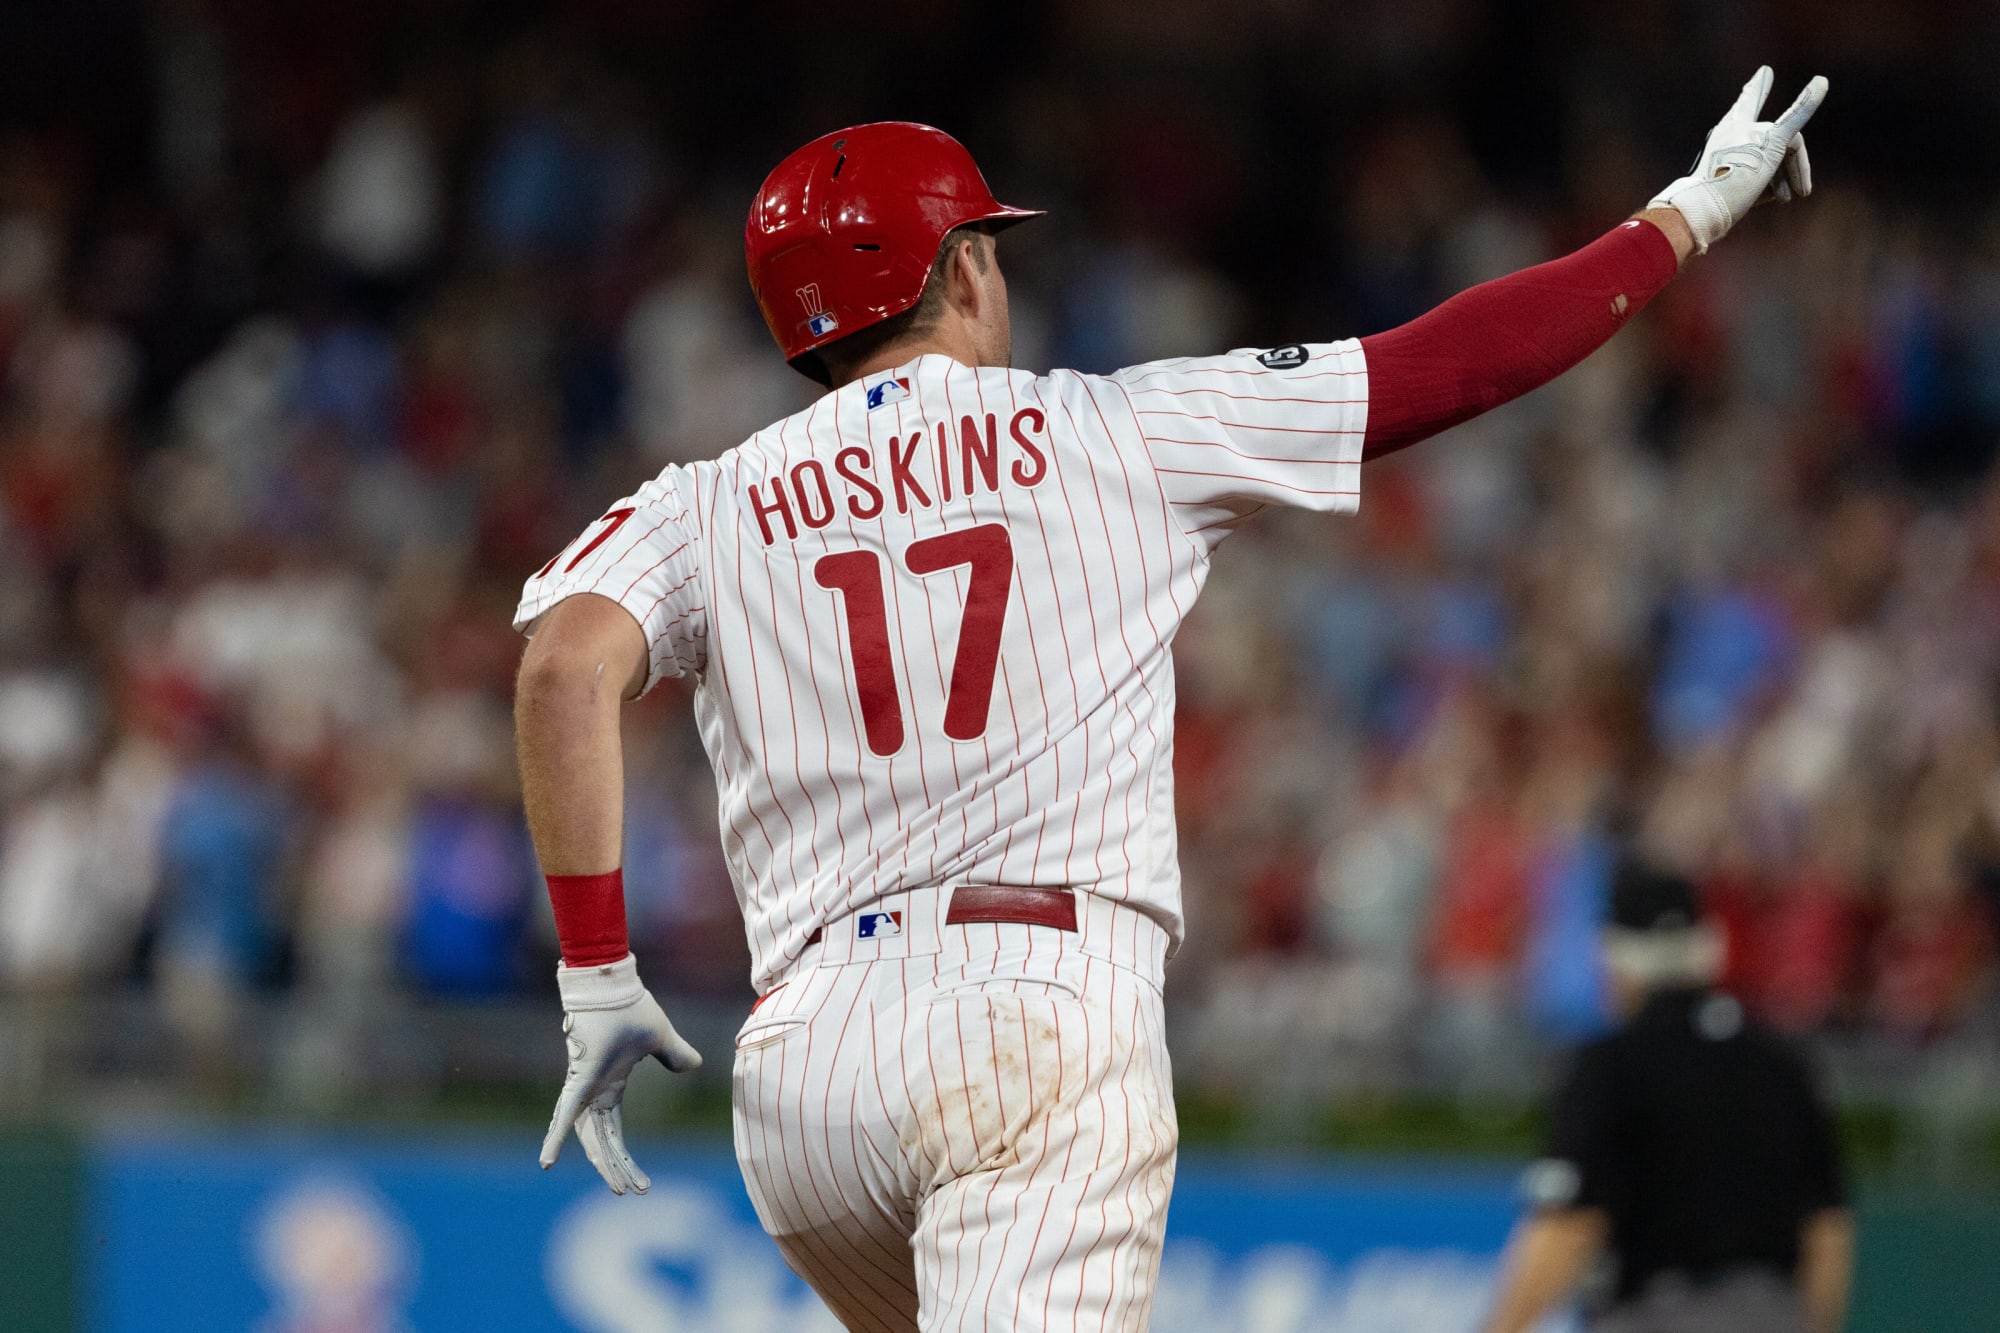 Philadelphia Phillies: Should Rhys Hoskins Stay? Or is it time to move on?